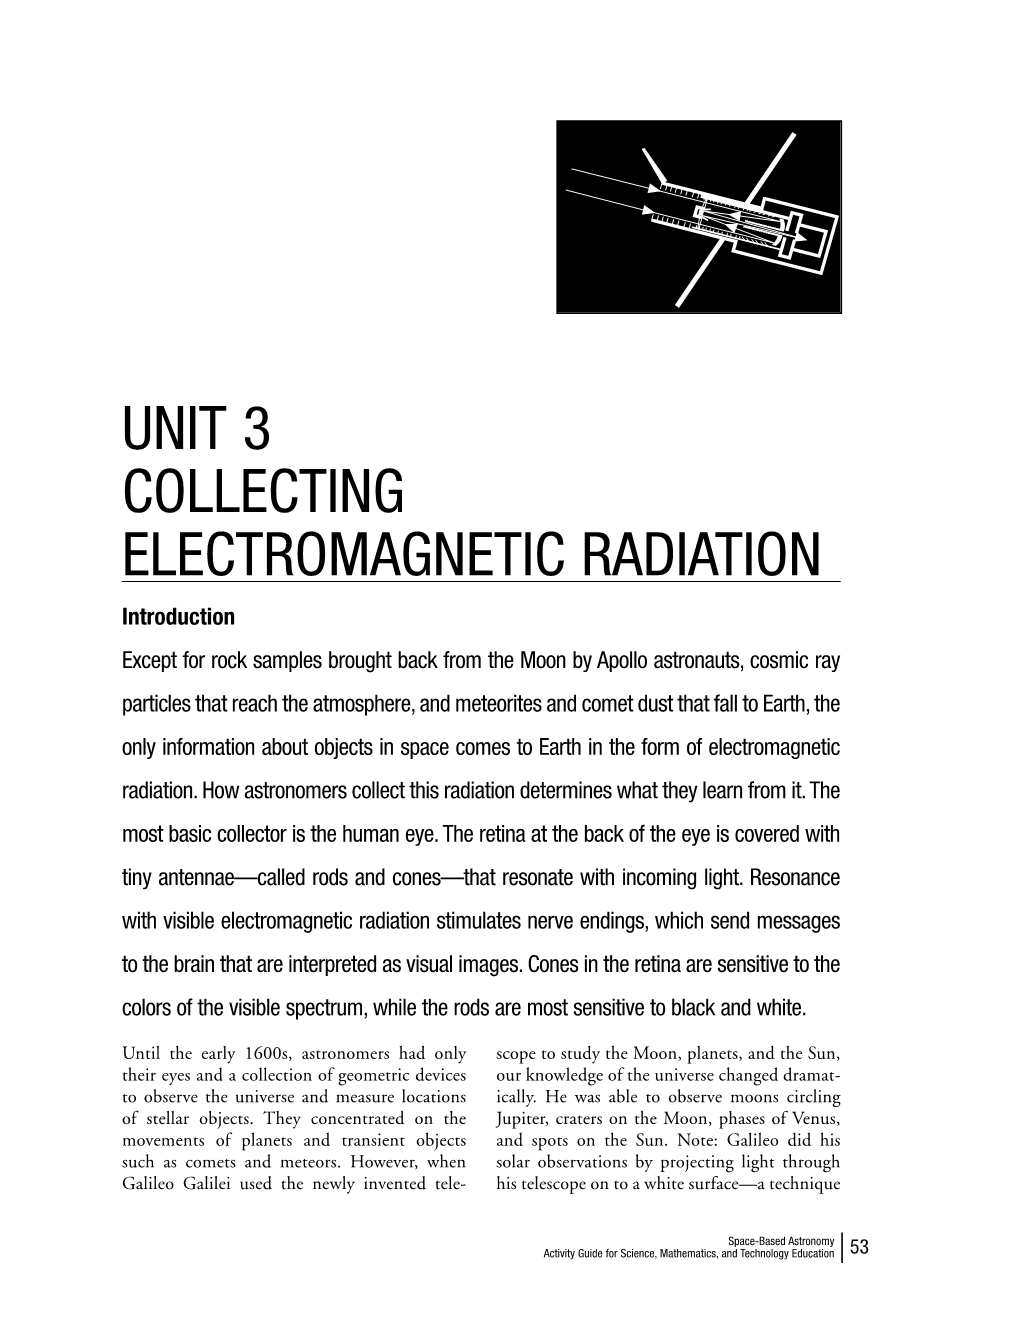 Collecting Electromagnetic Radiation Unit